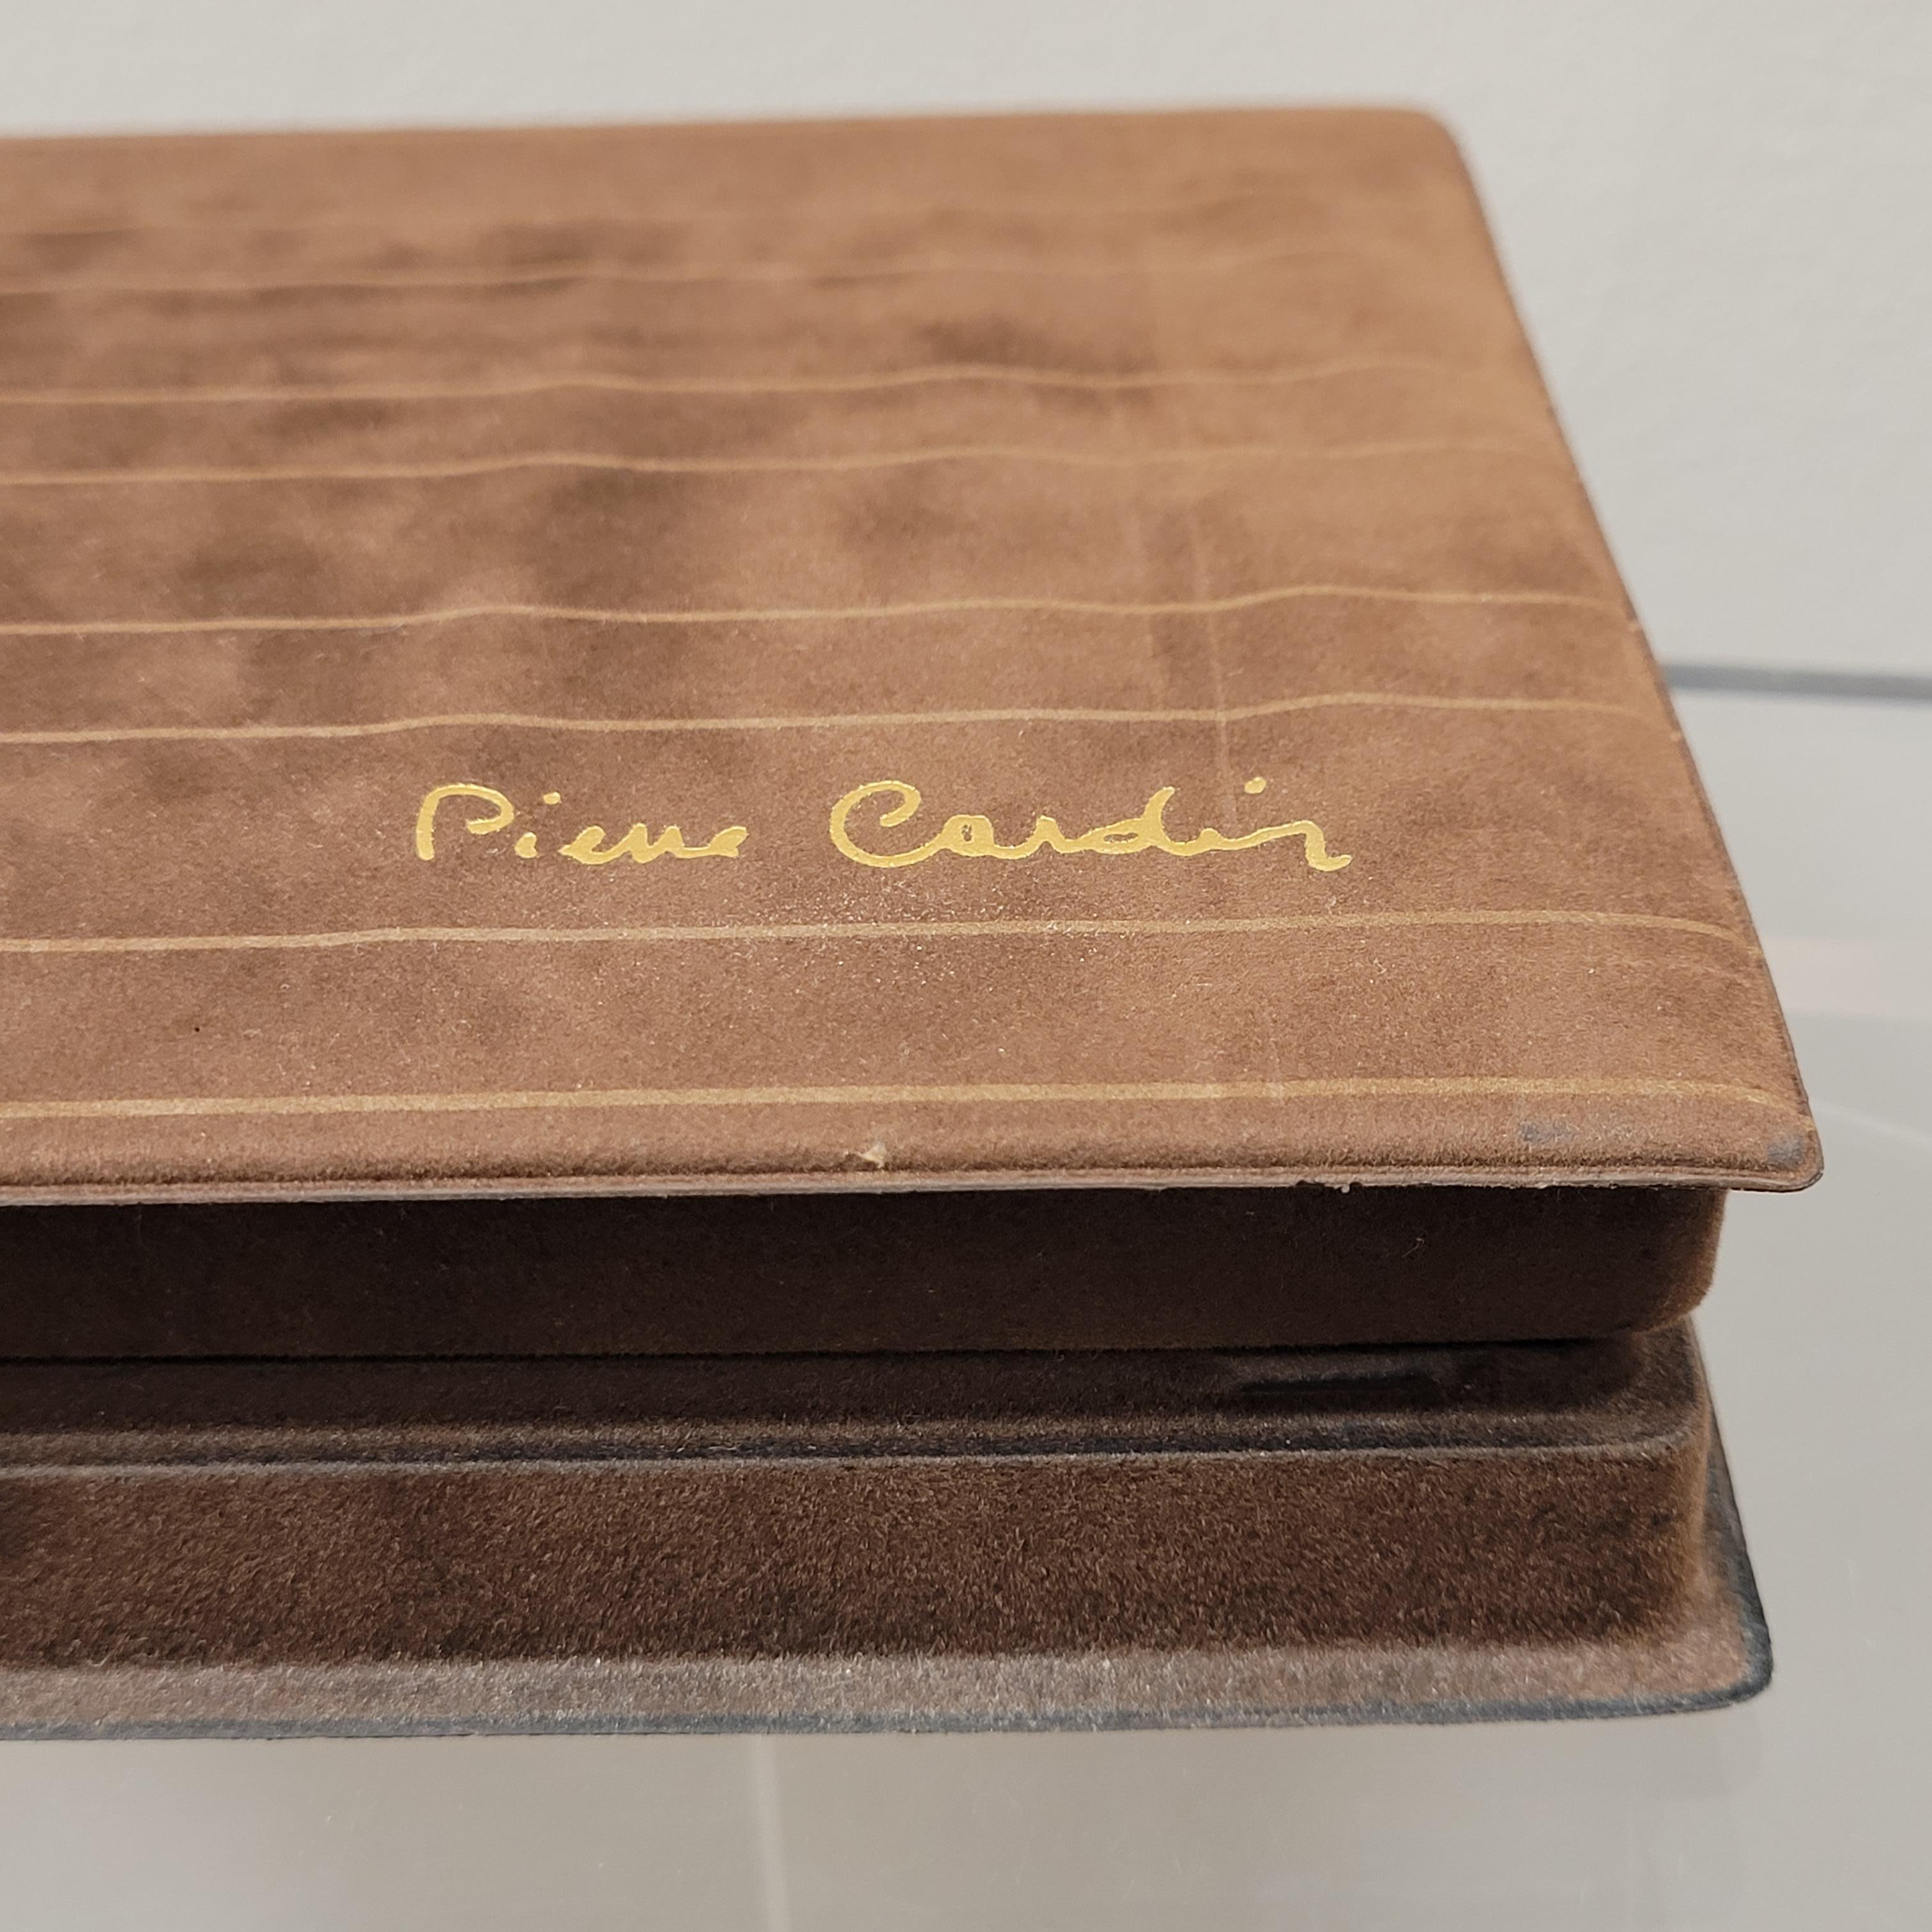 Poker game or set, signed by Pierre Cardin, 60's - 70's, France 3